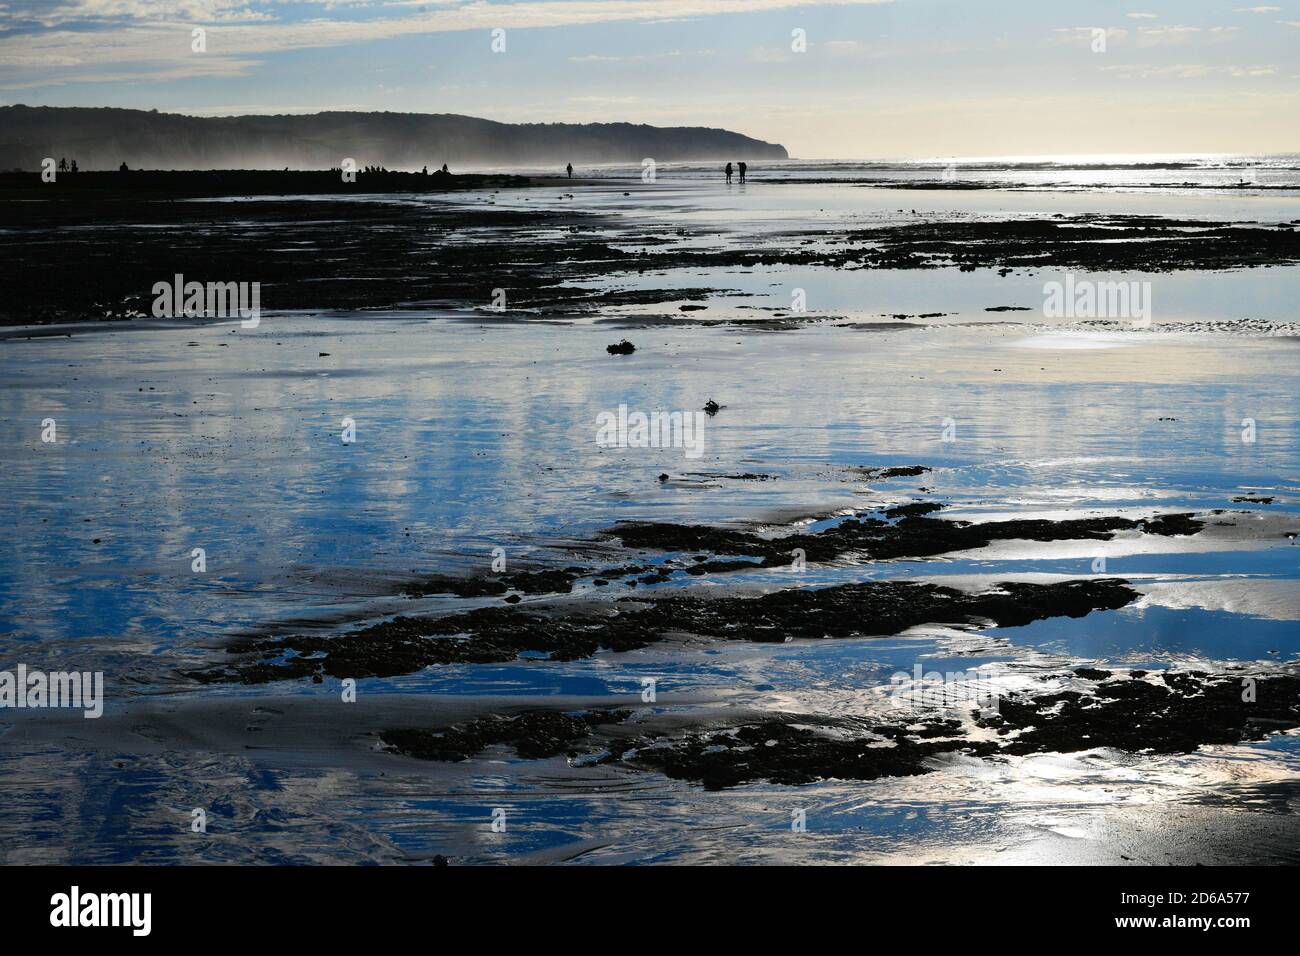 Dieppe, Haute-Normandie, reflections in sea, France. Stock Photo